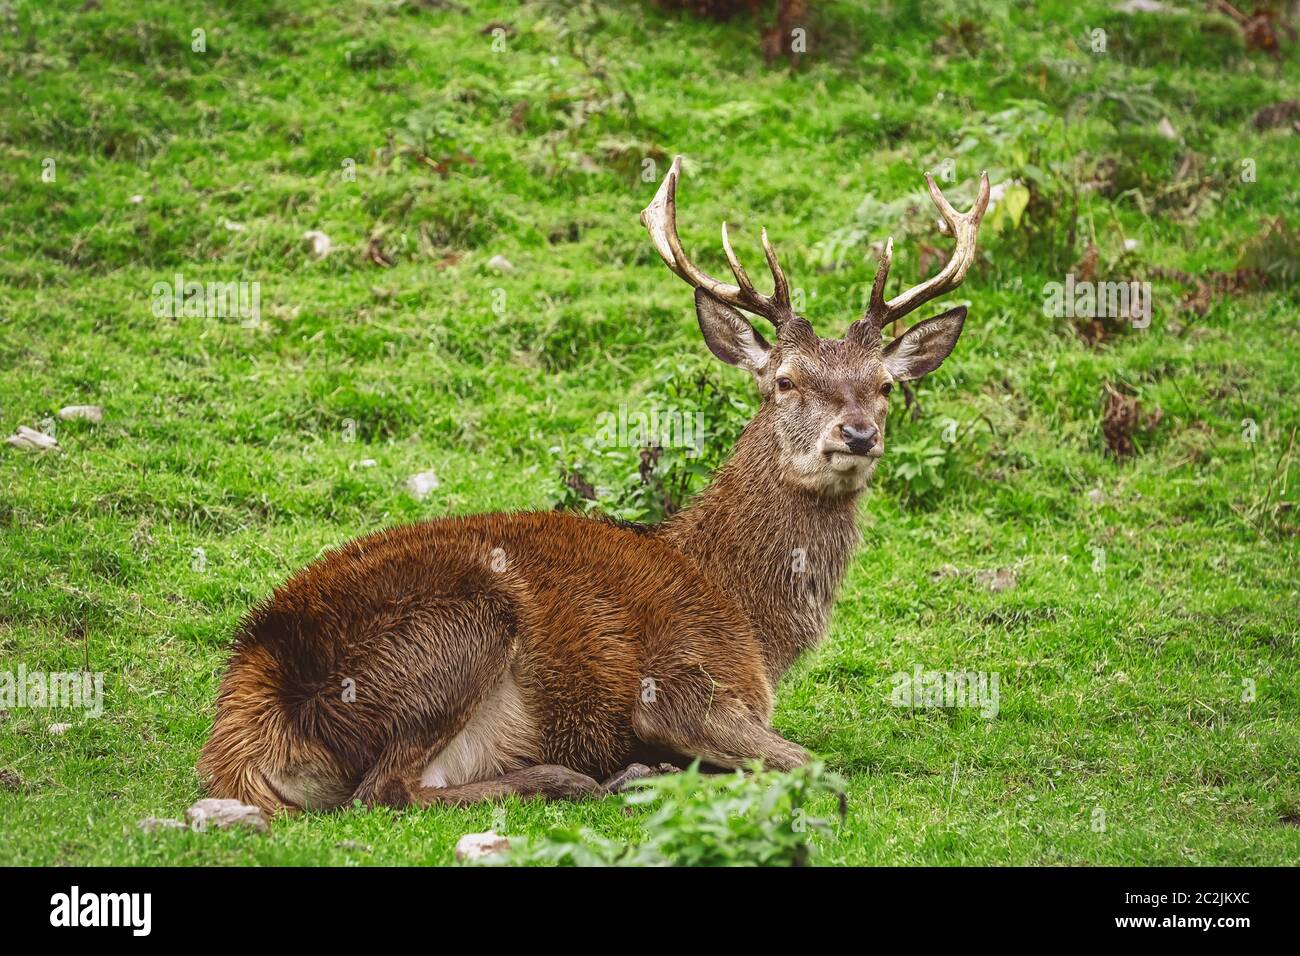 Deer Rest on the Grass Stock Photo